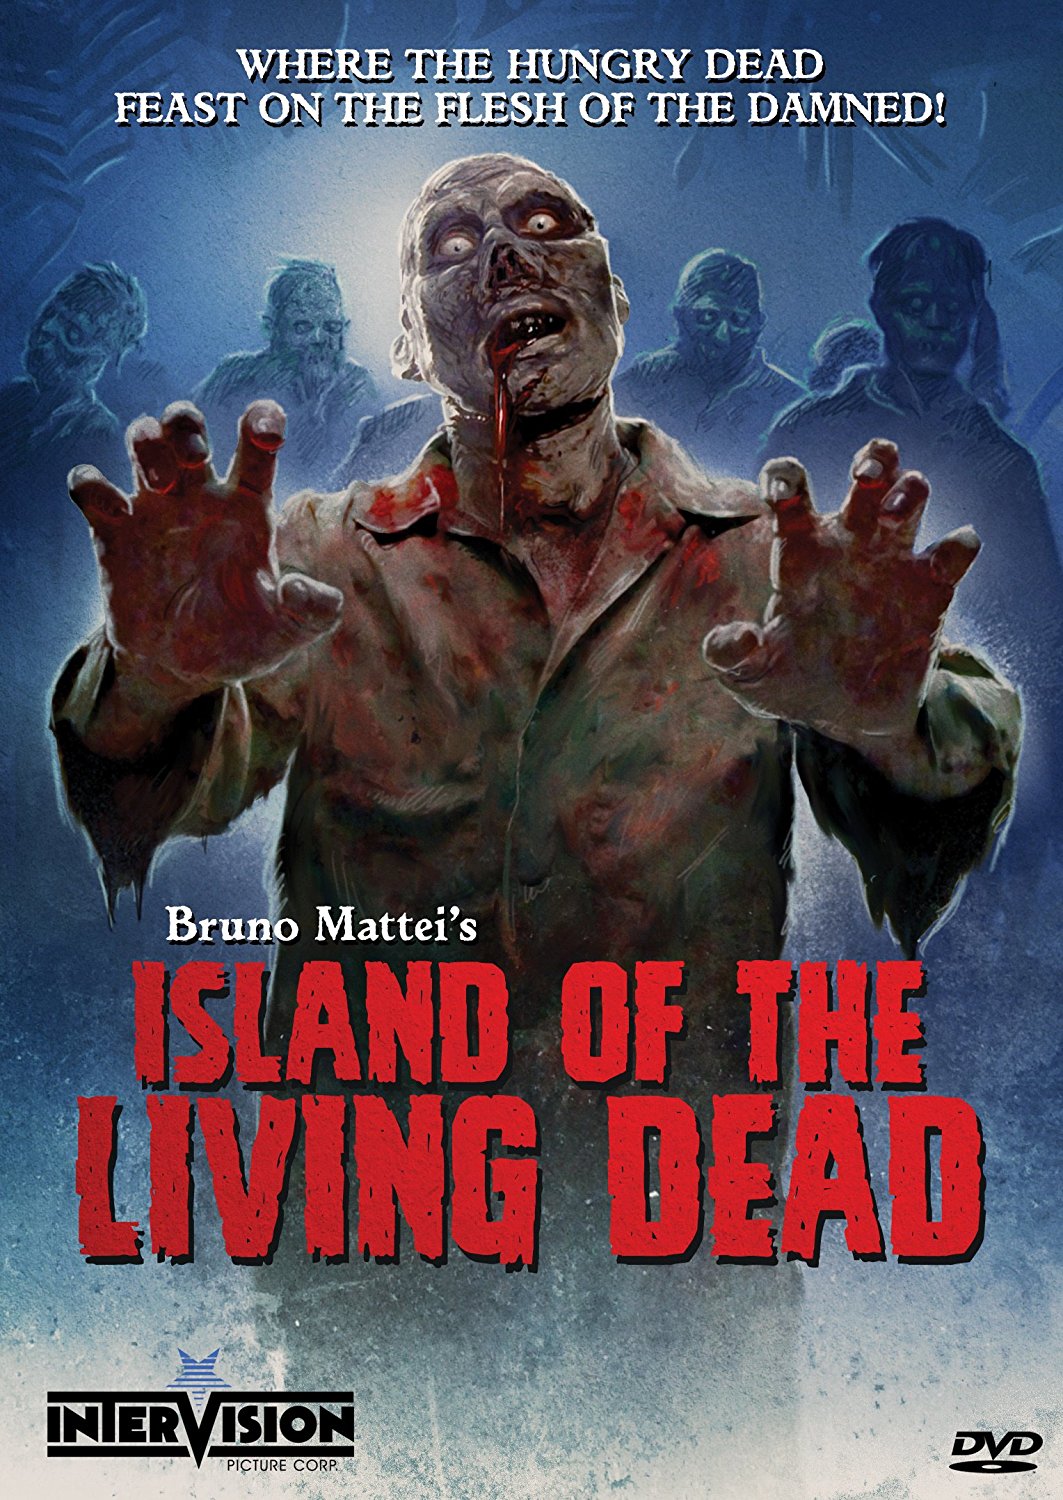 ISLAND OF THE LIVING DEAD DVD